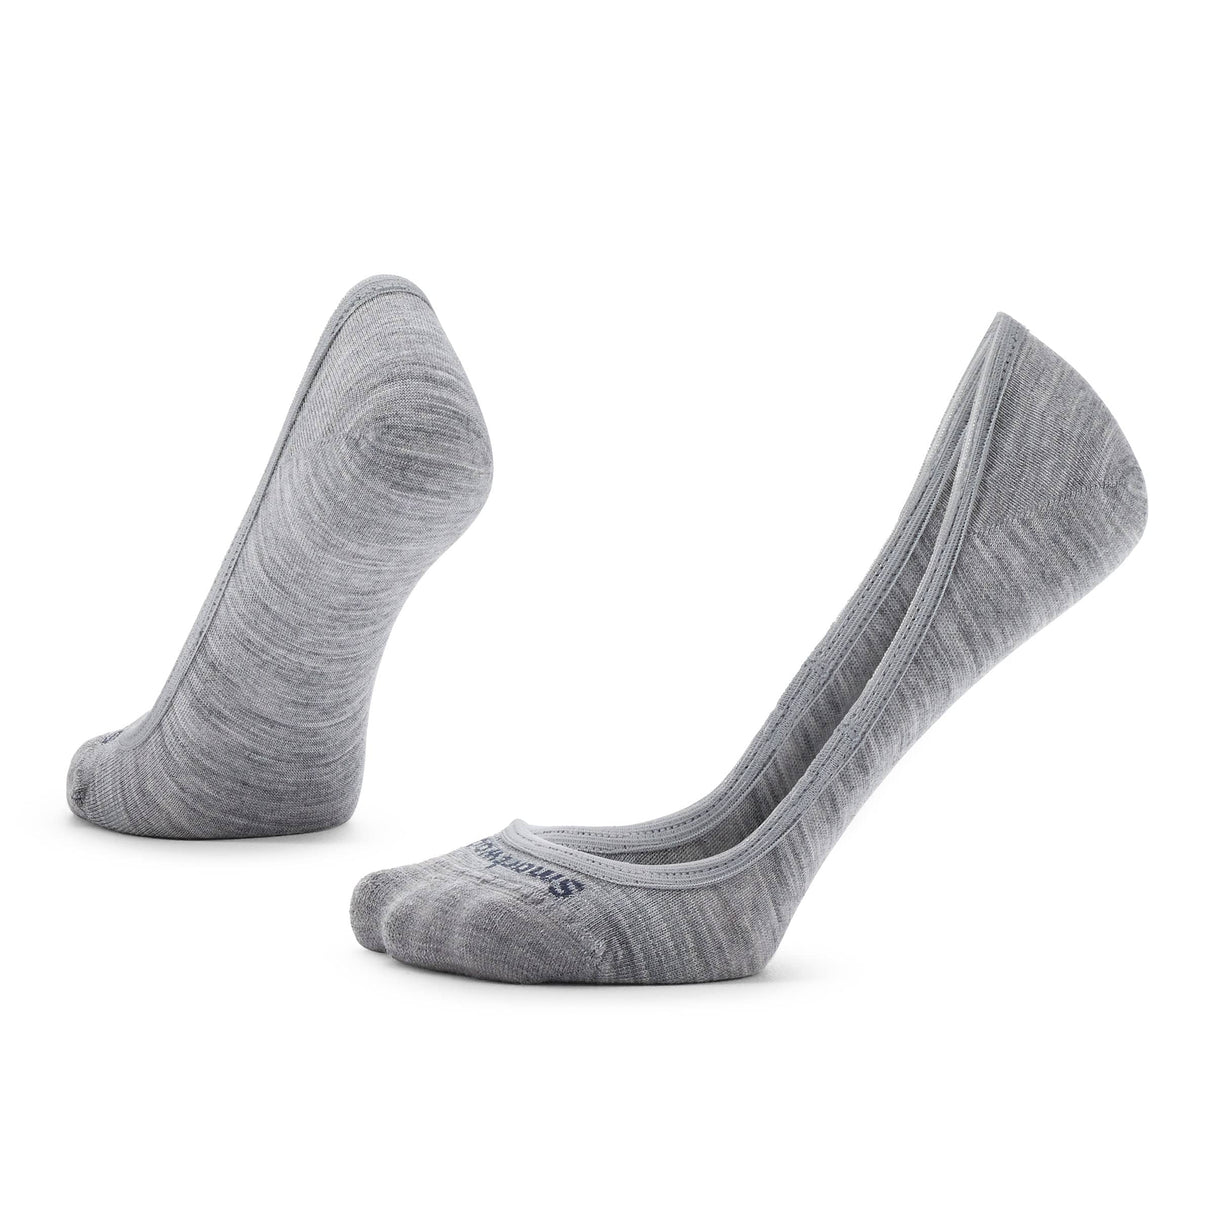 Smartwool Everyday Low Cut No Show Socks  -  Small / Light Gray